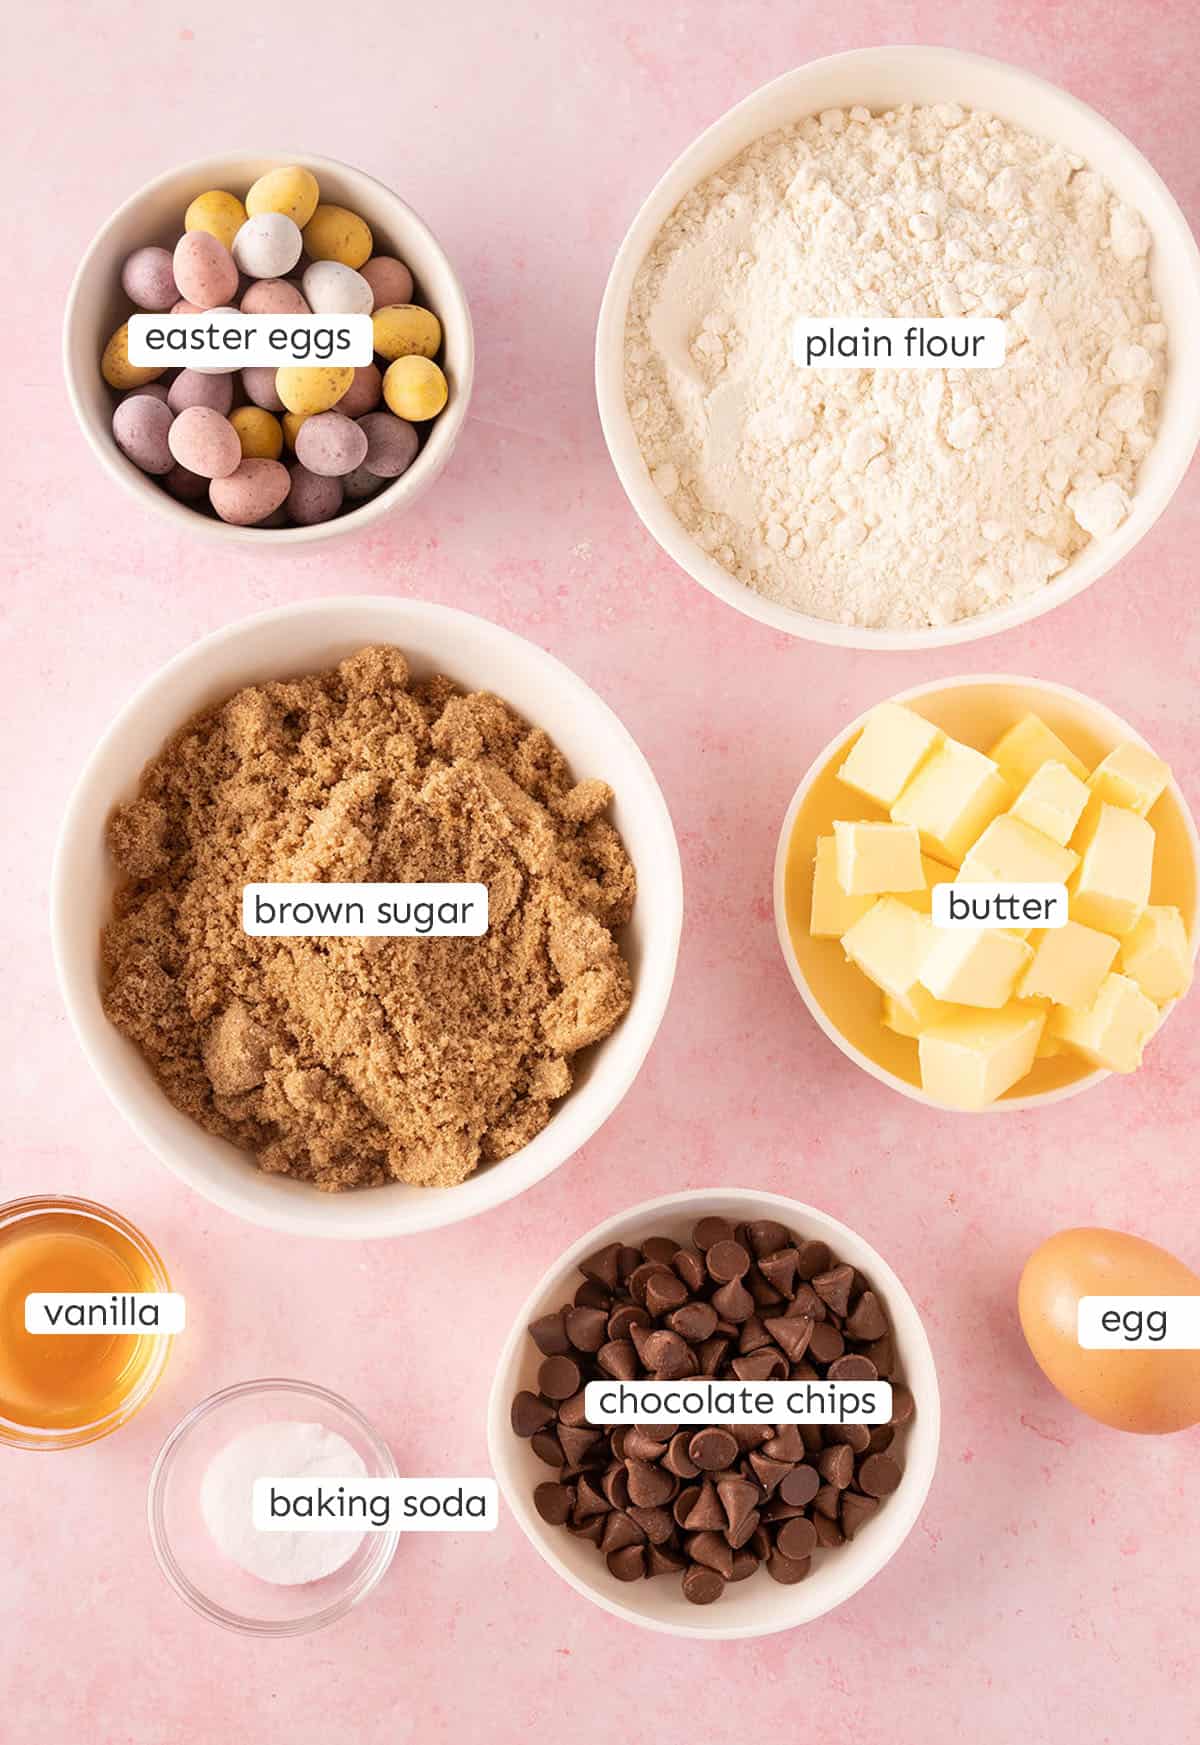 All the ingredients needed to make Mini Egg Cookies from scratch on a pink backedrop.